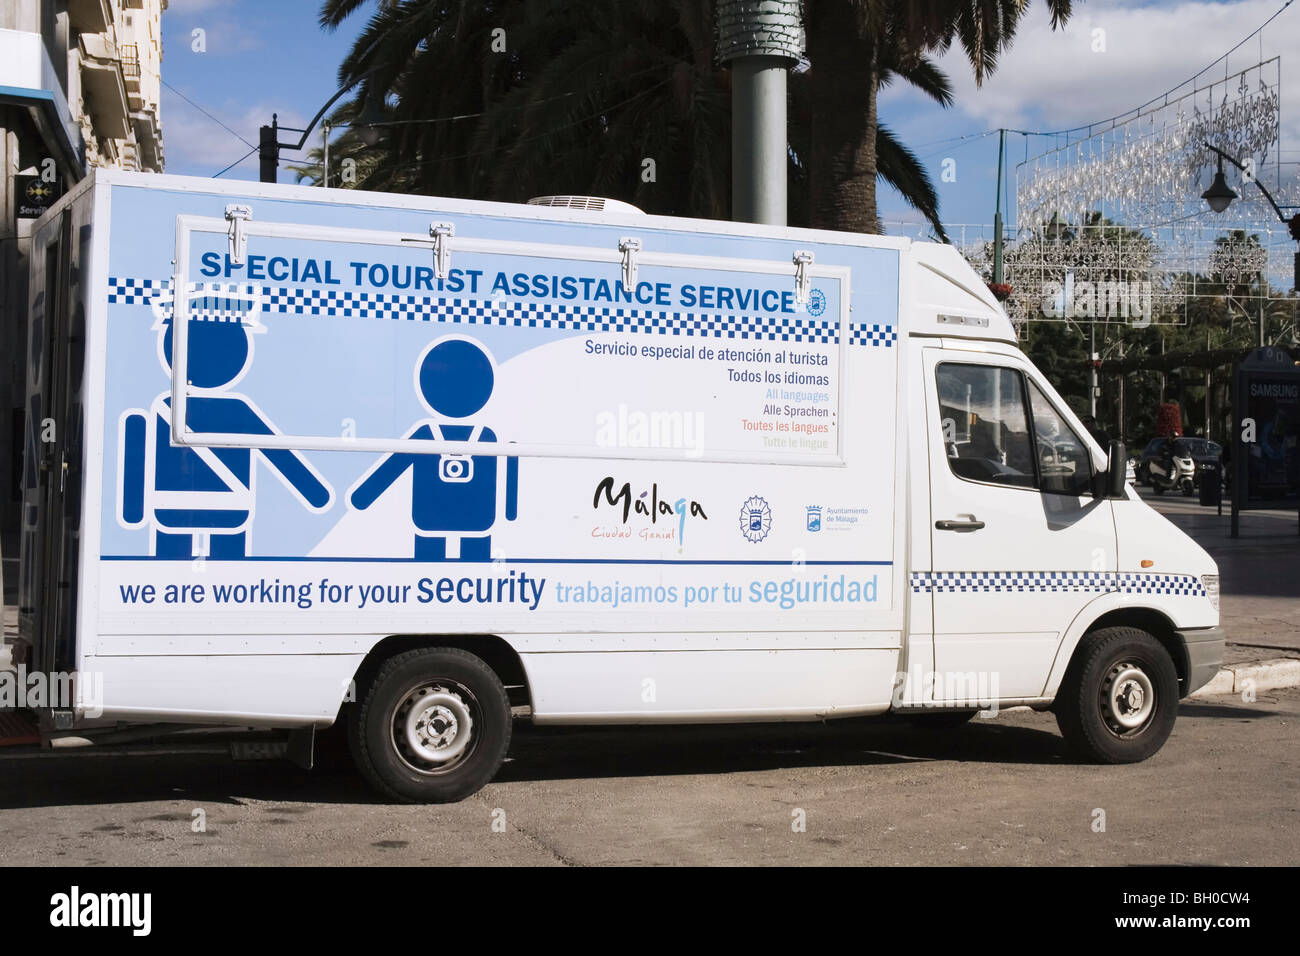 Malaga, Costa del Sol, Spain. Special Tourist Assistance Service van parked in city centre. Stock Photo